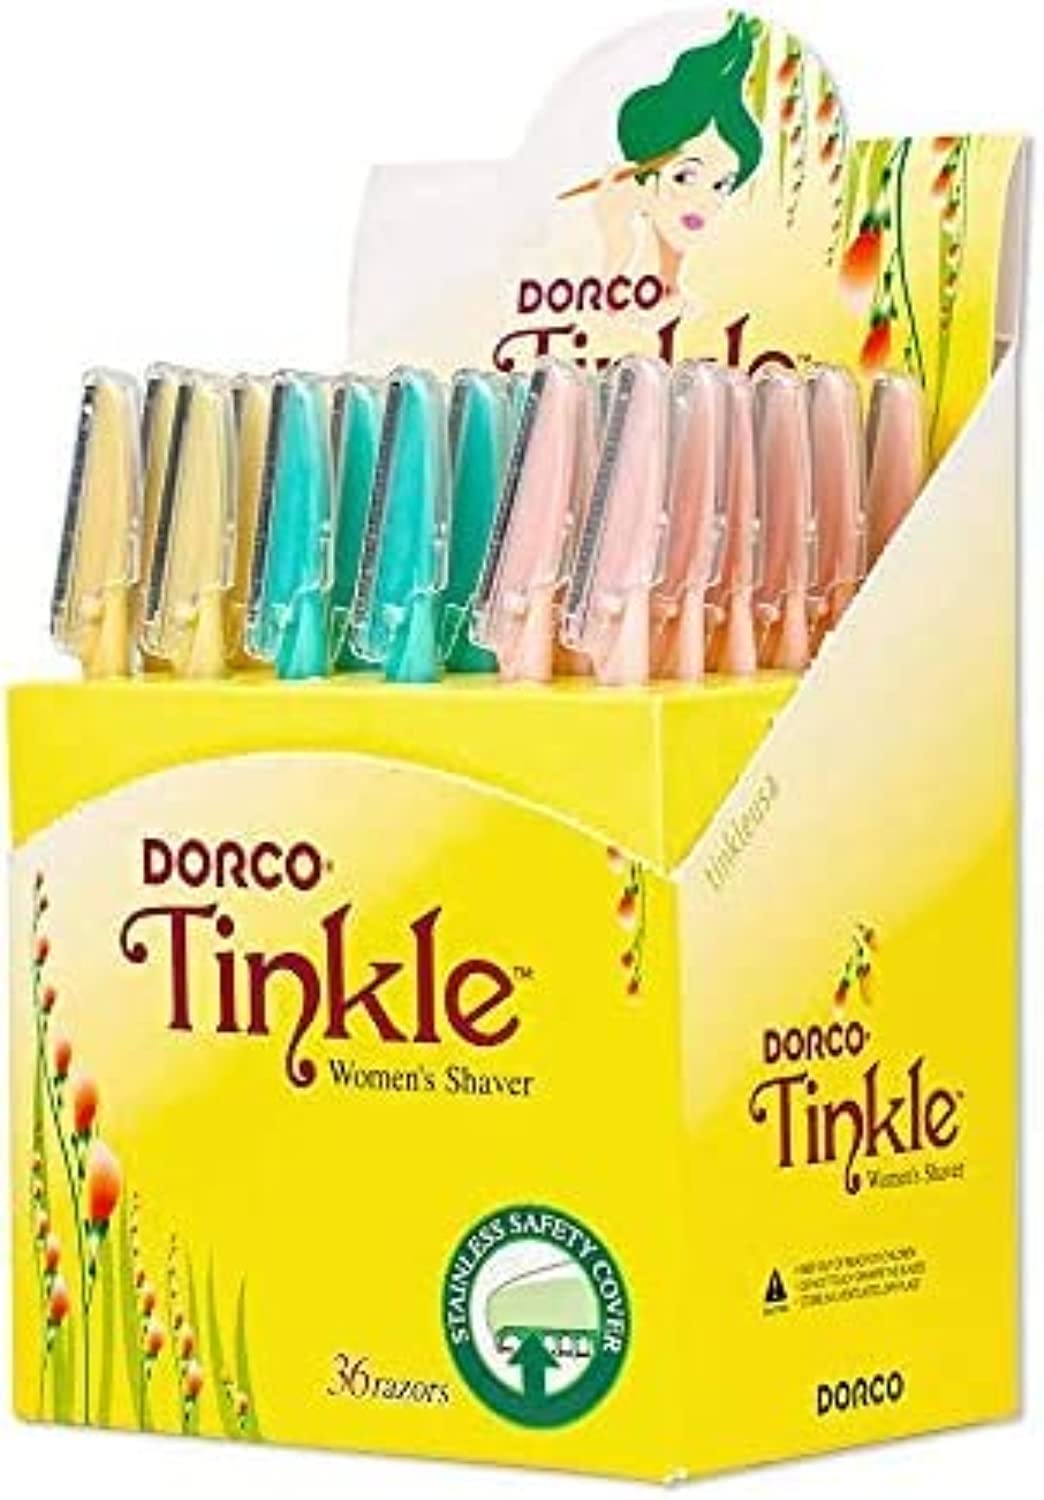 Tinkle Women's Shaver Razors, Pack of 36 | Dermaplaning Razor Tool | Skincare Party Favors Beauty Holiday Stocking Stuffers Gift